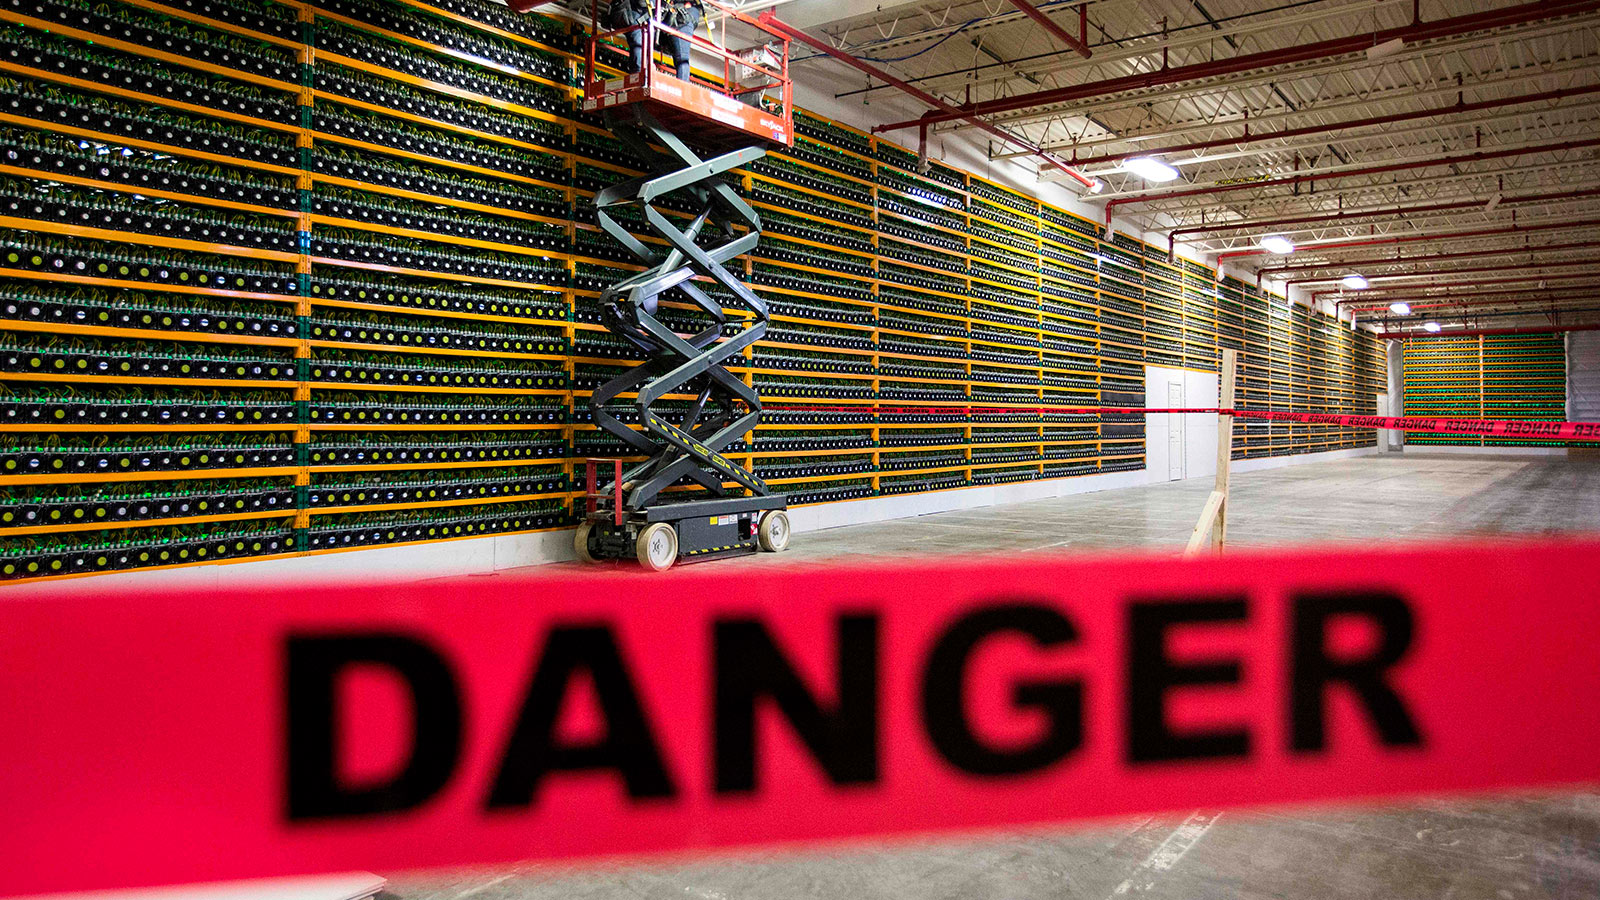 Two construction workers use a lift along a wall of bitcoin mining at Bitfarms in Saint Hyacinthe, Quebec on March 19, 2018. Bitcoin is a cryptocurrency and worldwide payment system.